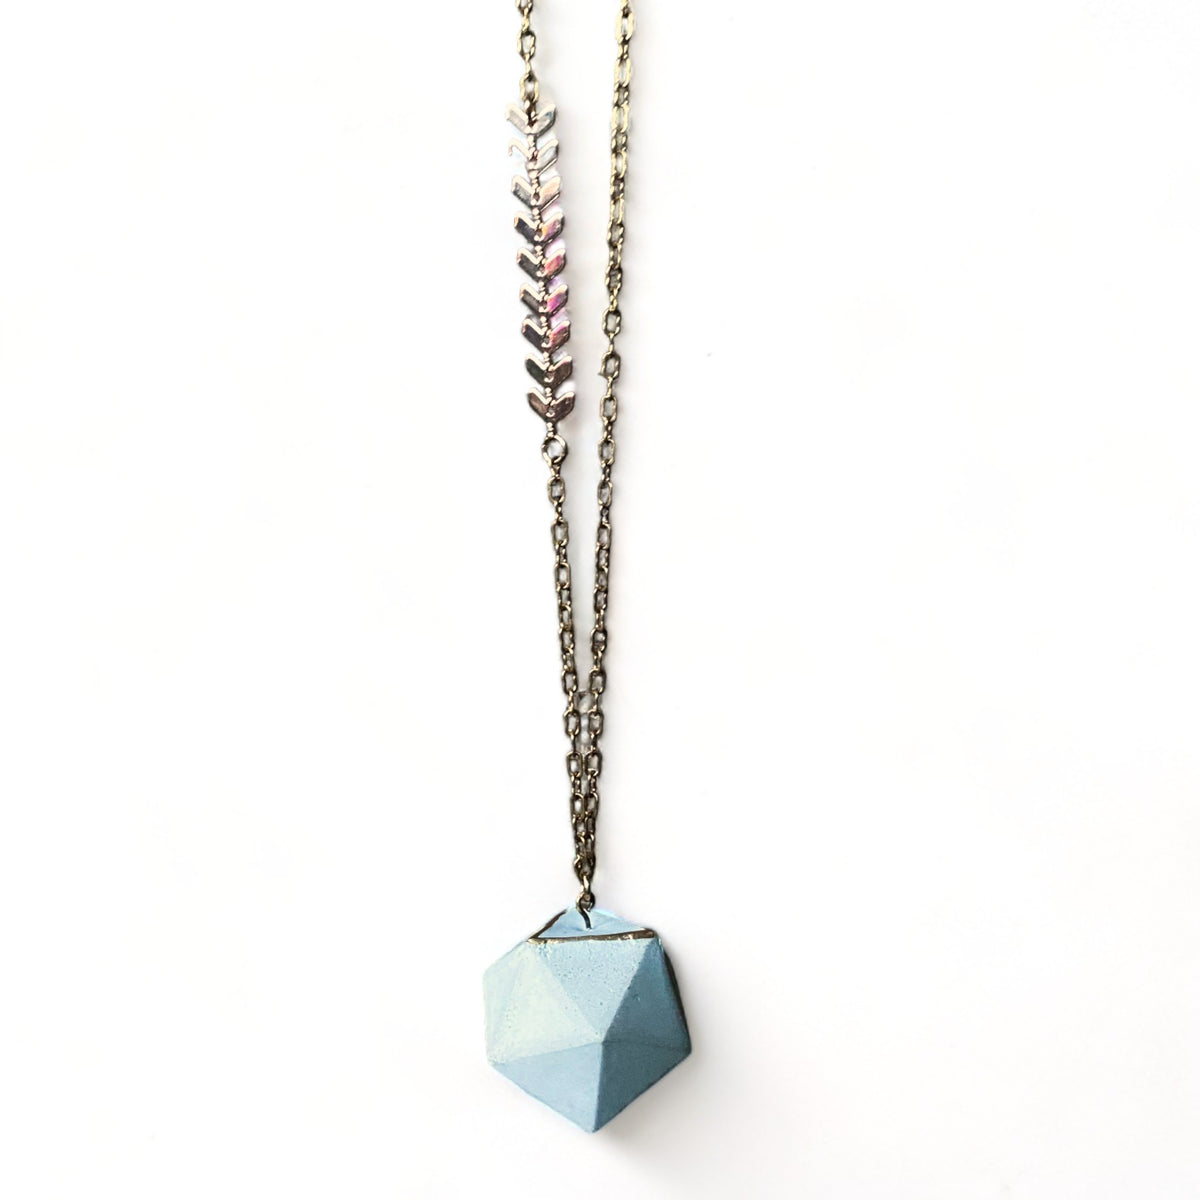 Concrete Dodecahedron II Necklace